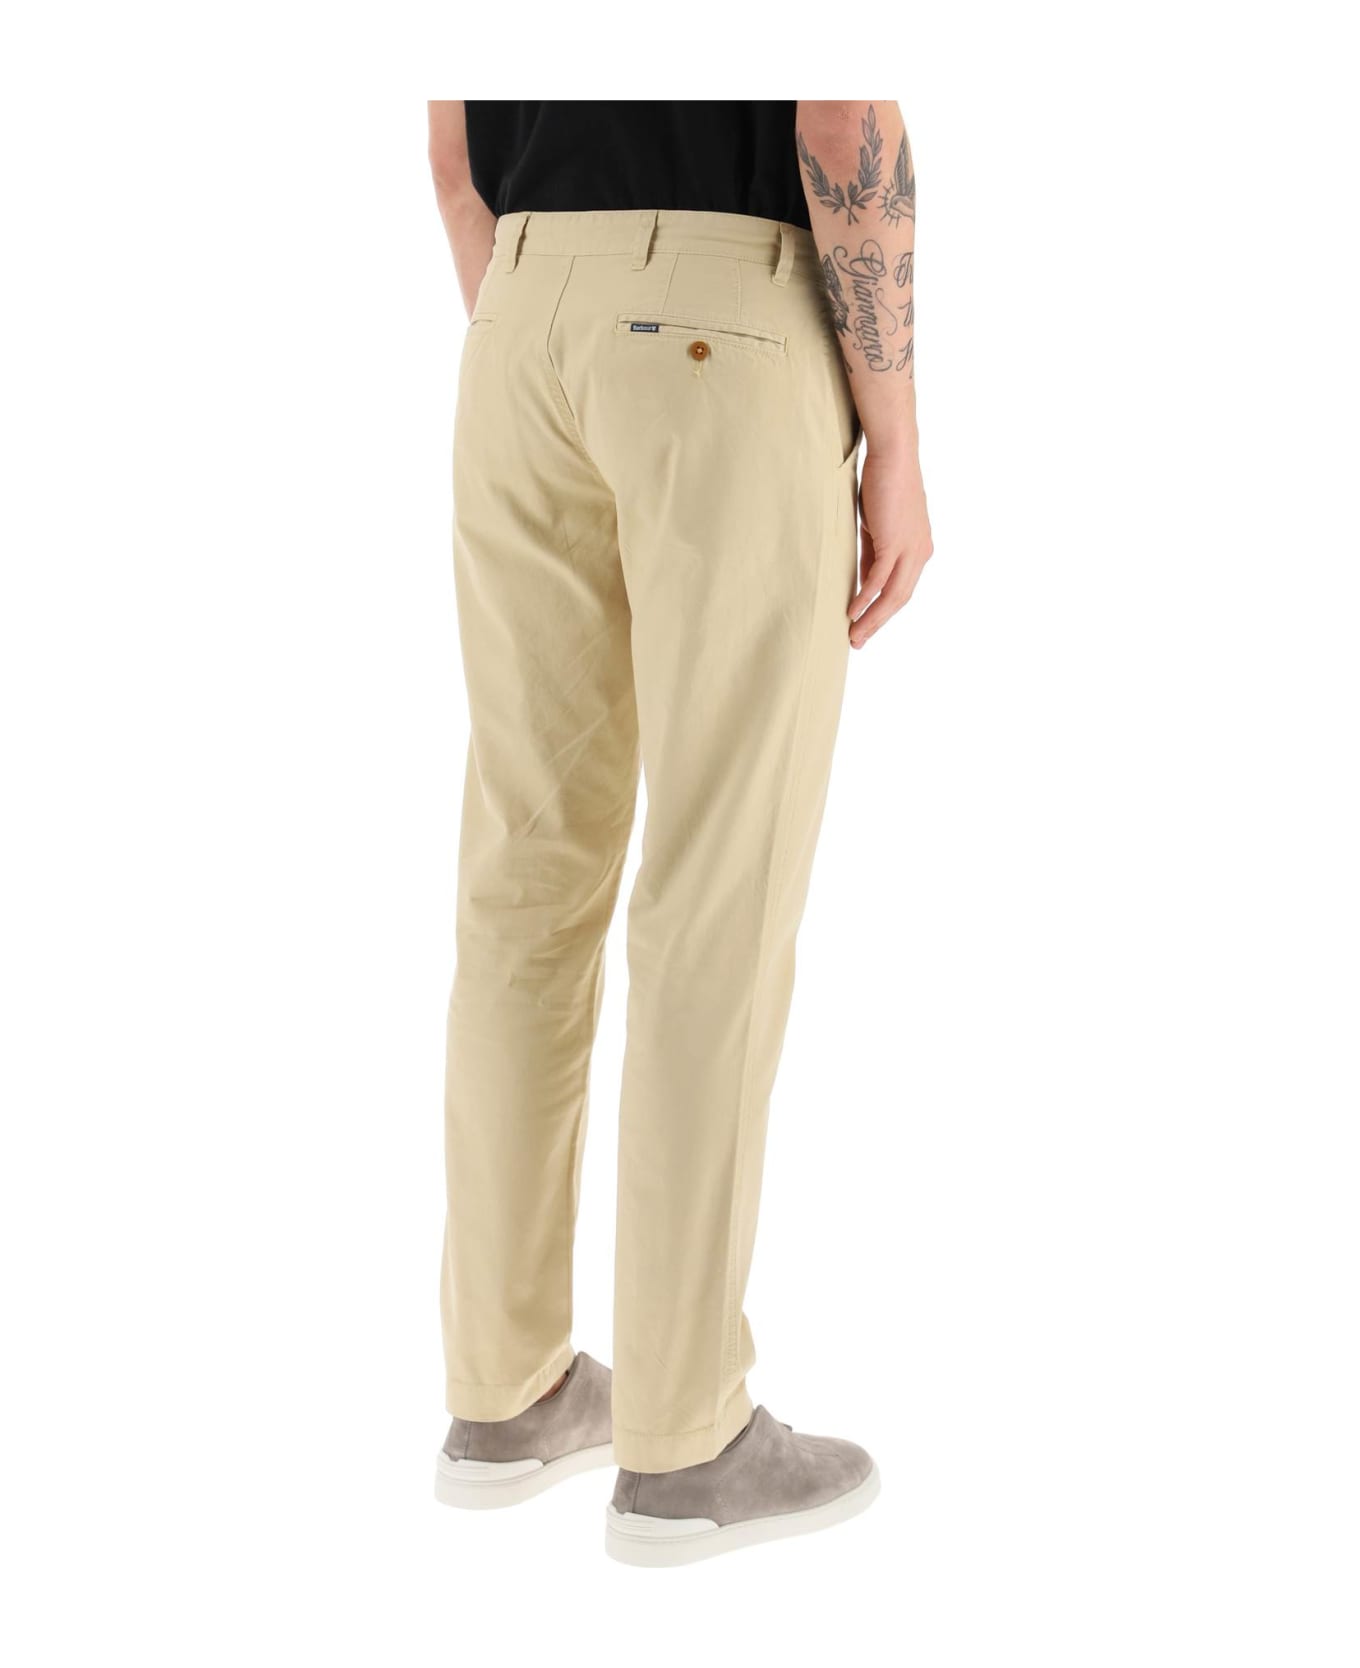 Barbour 'glendale' Chino Pants - STONE (Beige)